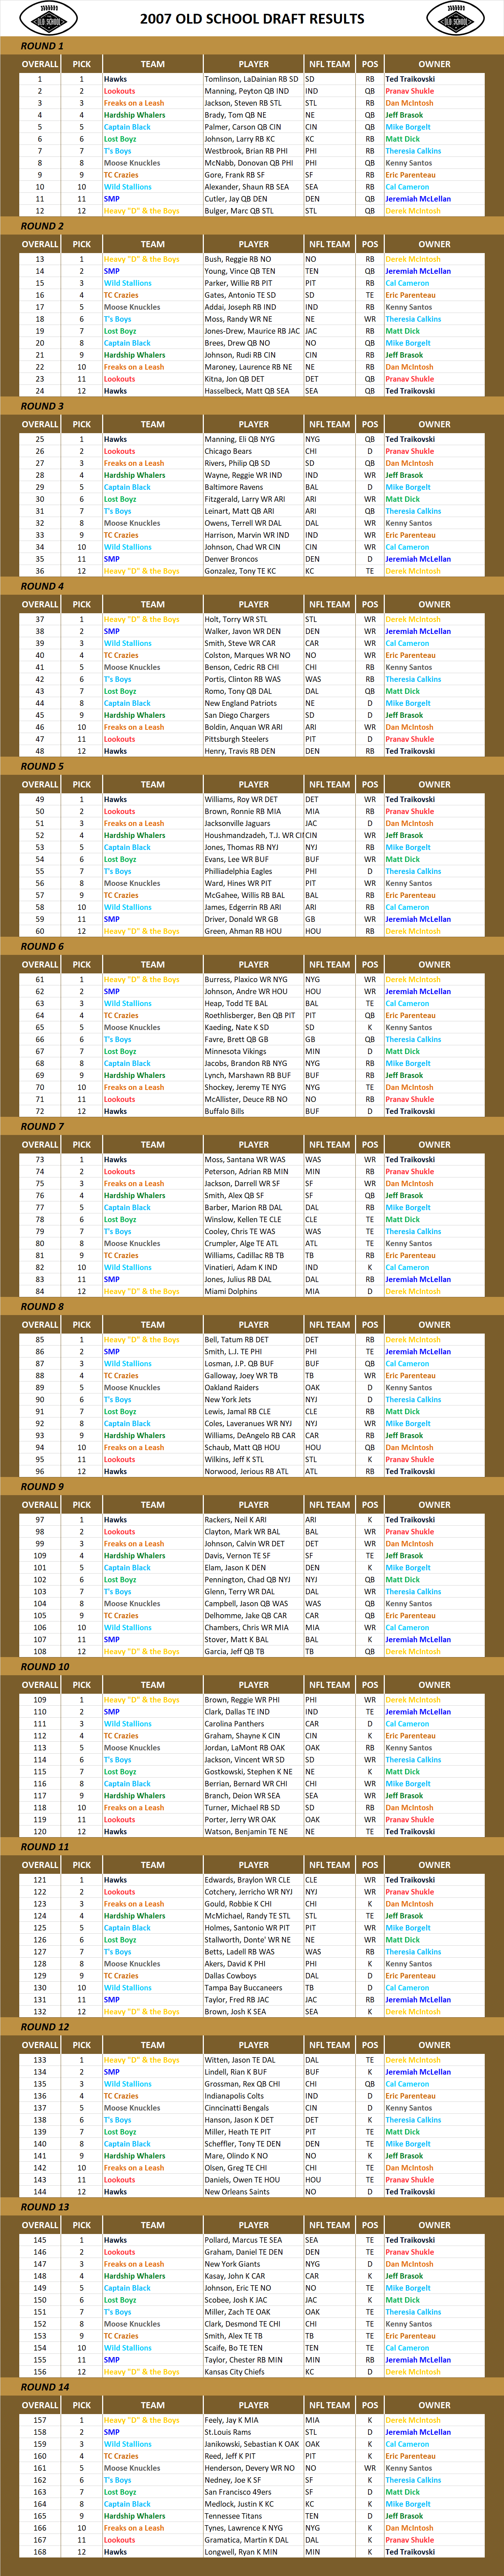 2007 National Football League Pool Draft Results